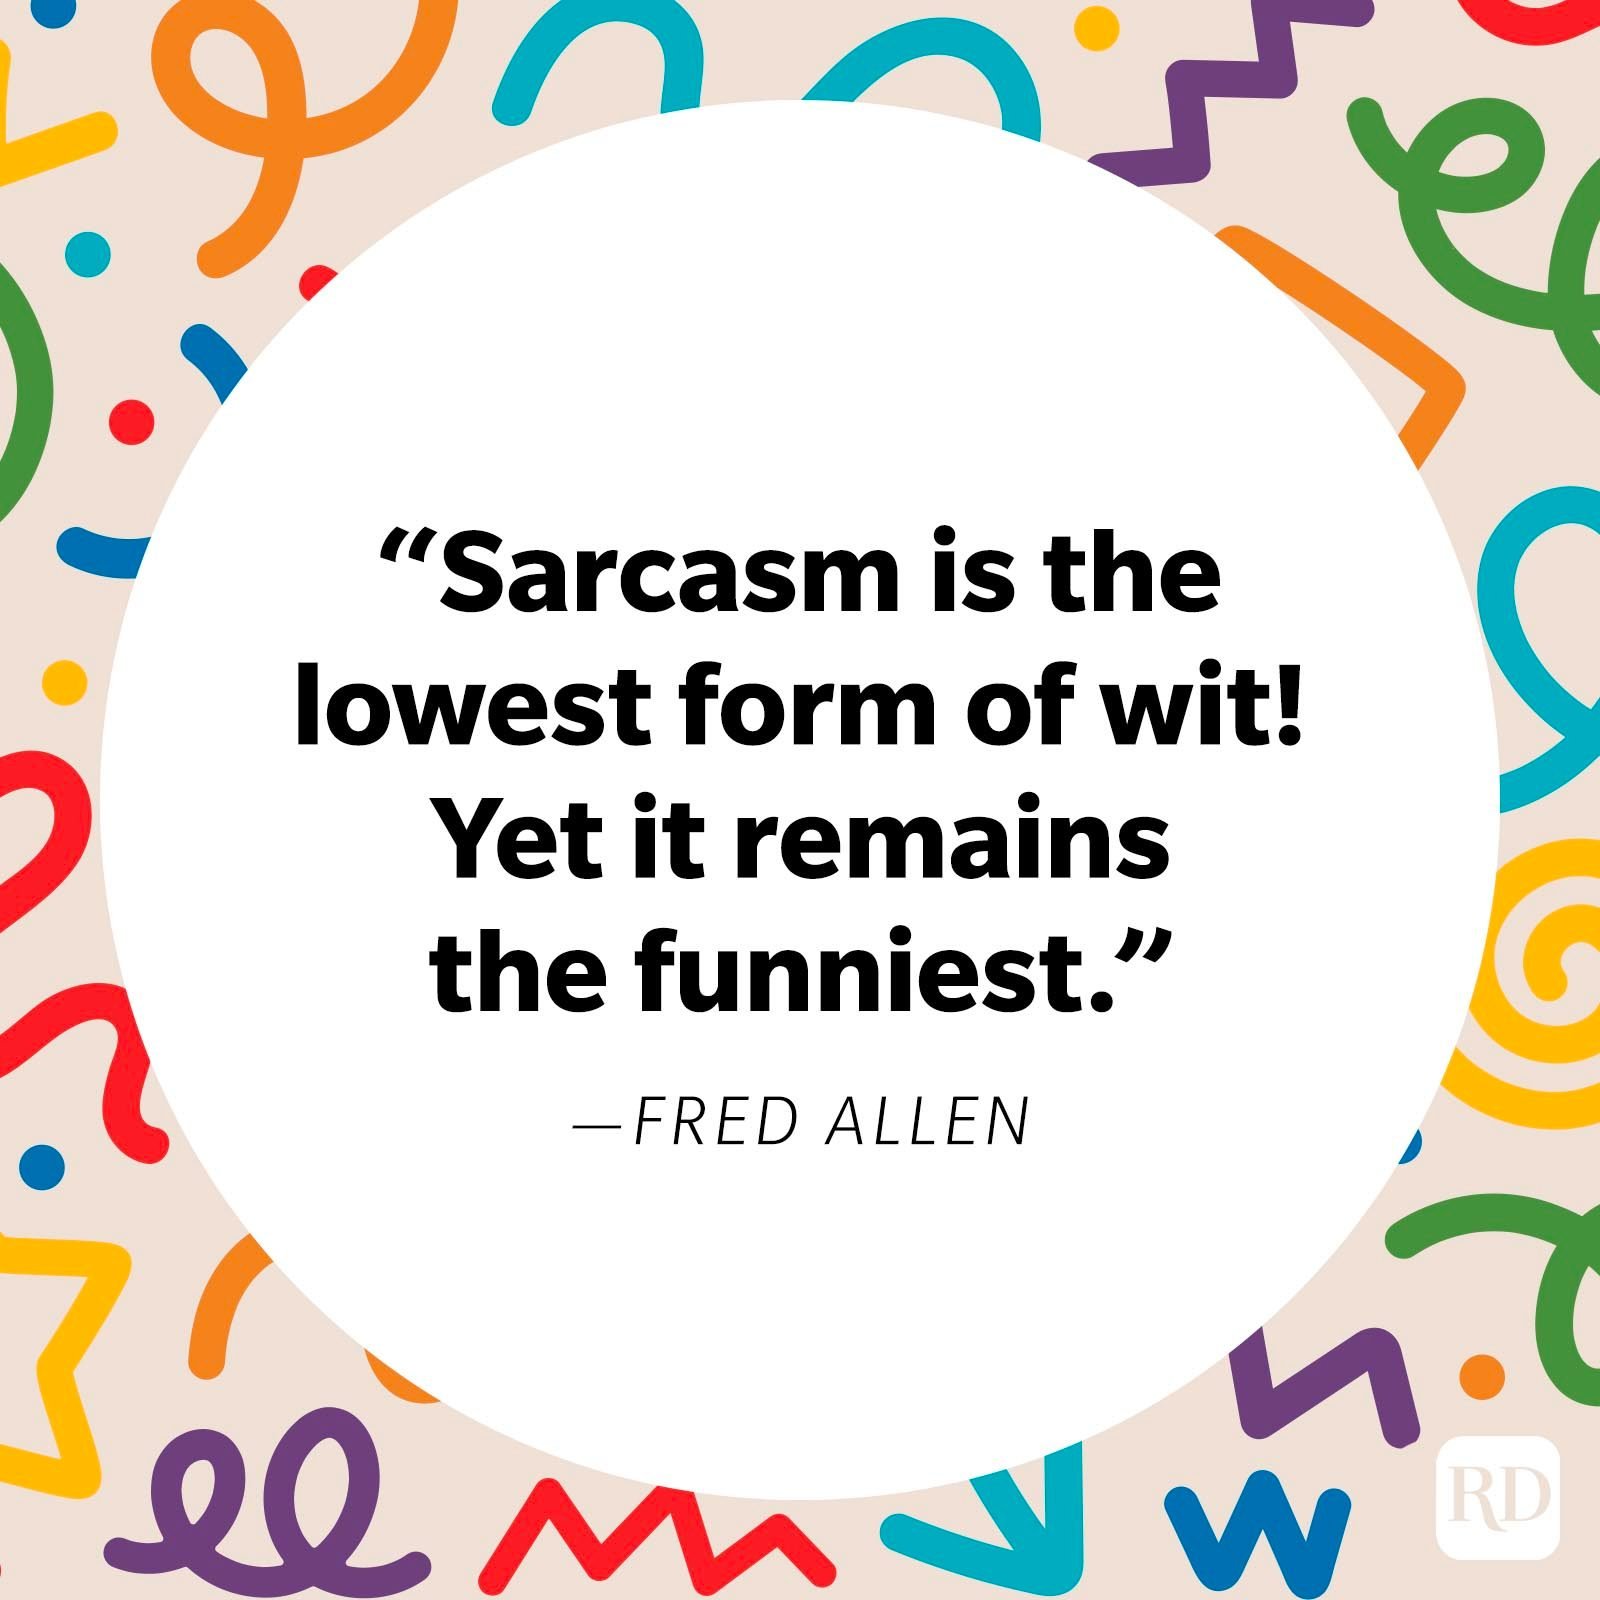 https://www.rd.com/wp-content/uploads/2023/04/Sarcasm-Quotes-FT-GettyImages-1379785033.jpg?fit=700%2C1024